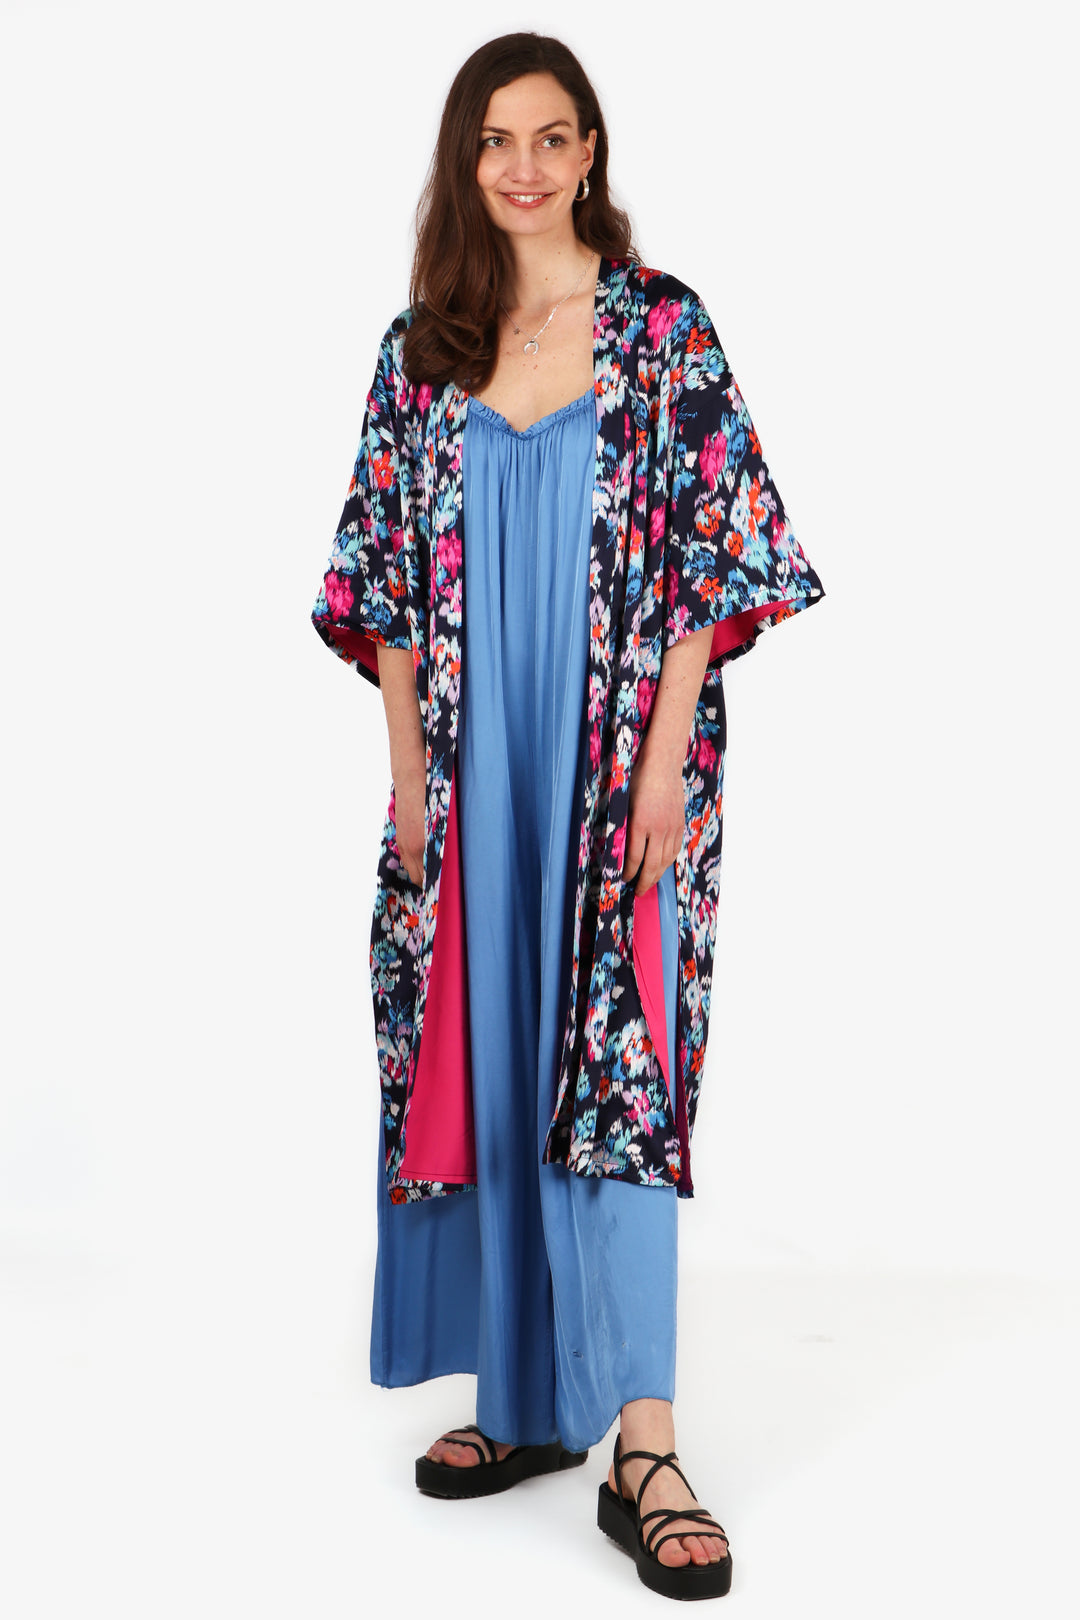 model wearing a mutlicolorued floral print kimono jacket with pink lining, the floral print is navy blue, white, red and pink 1